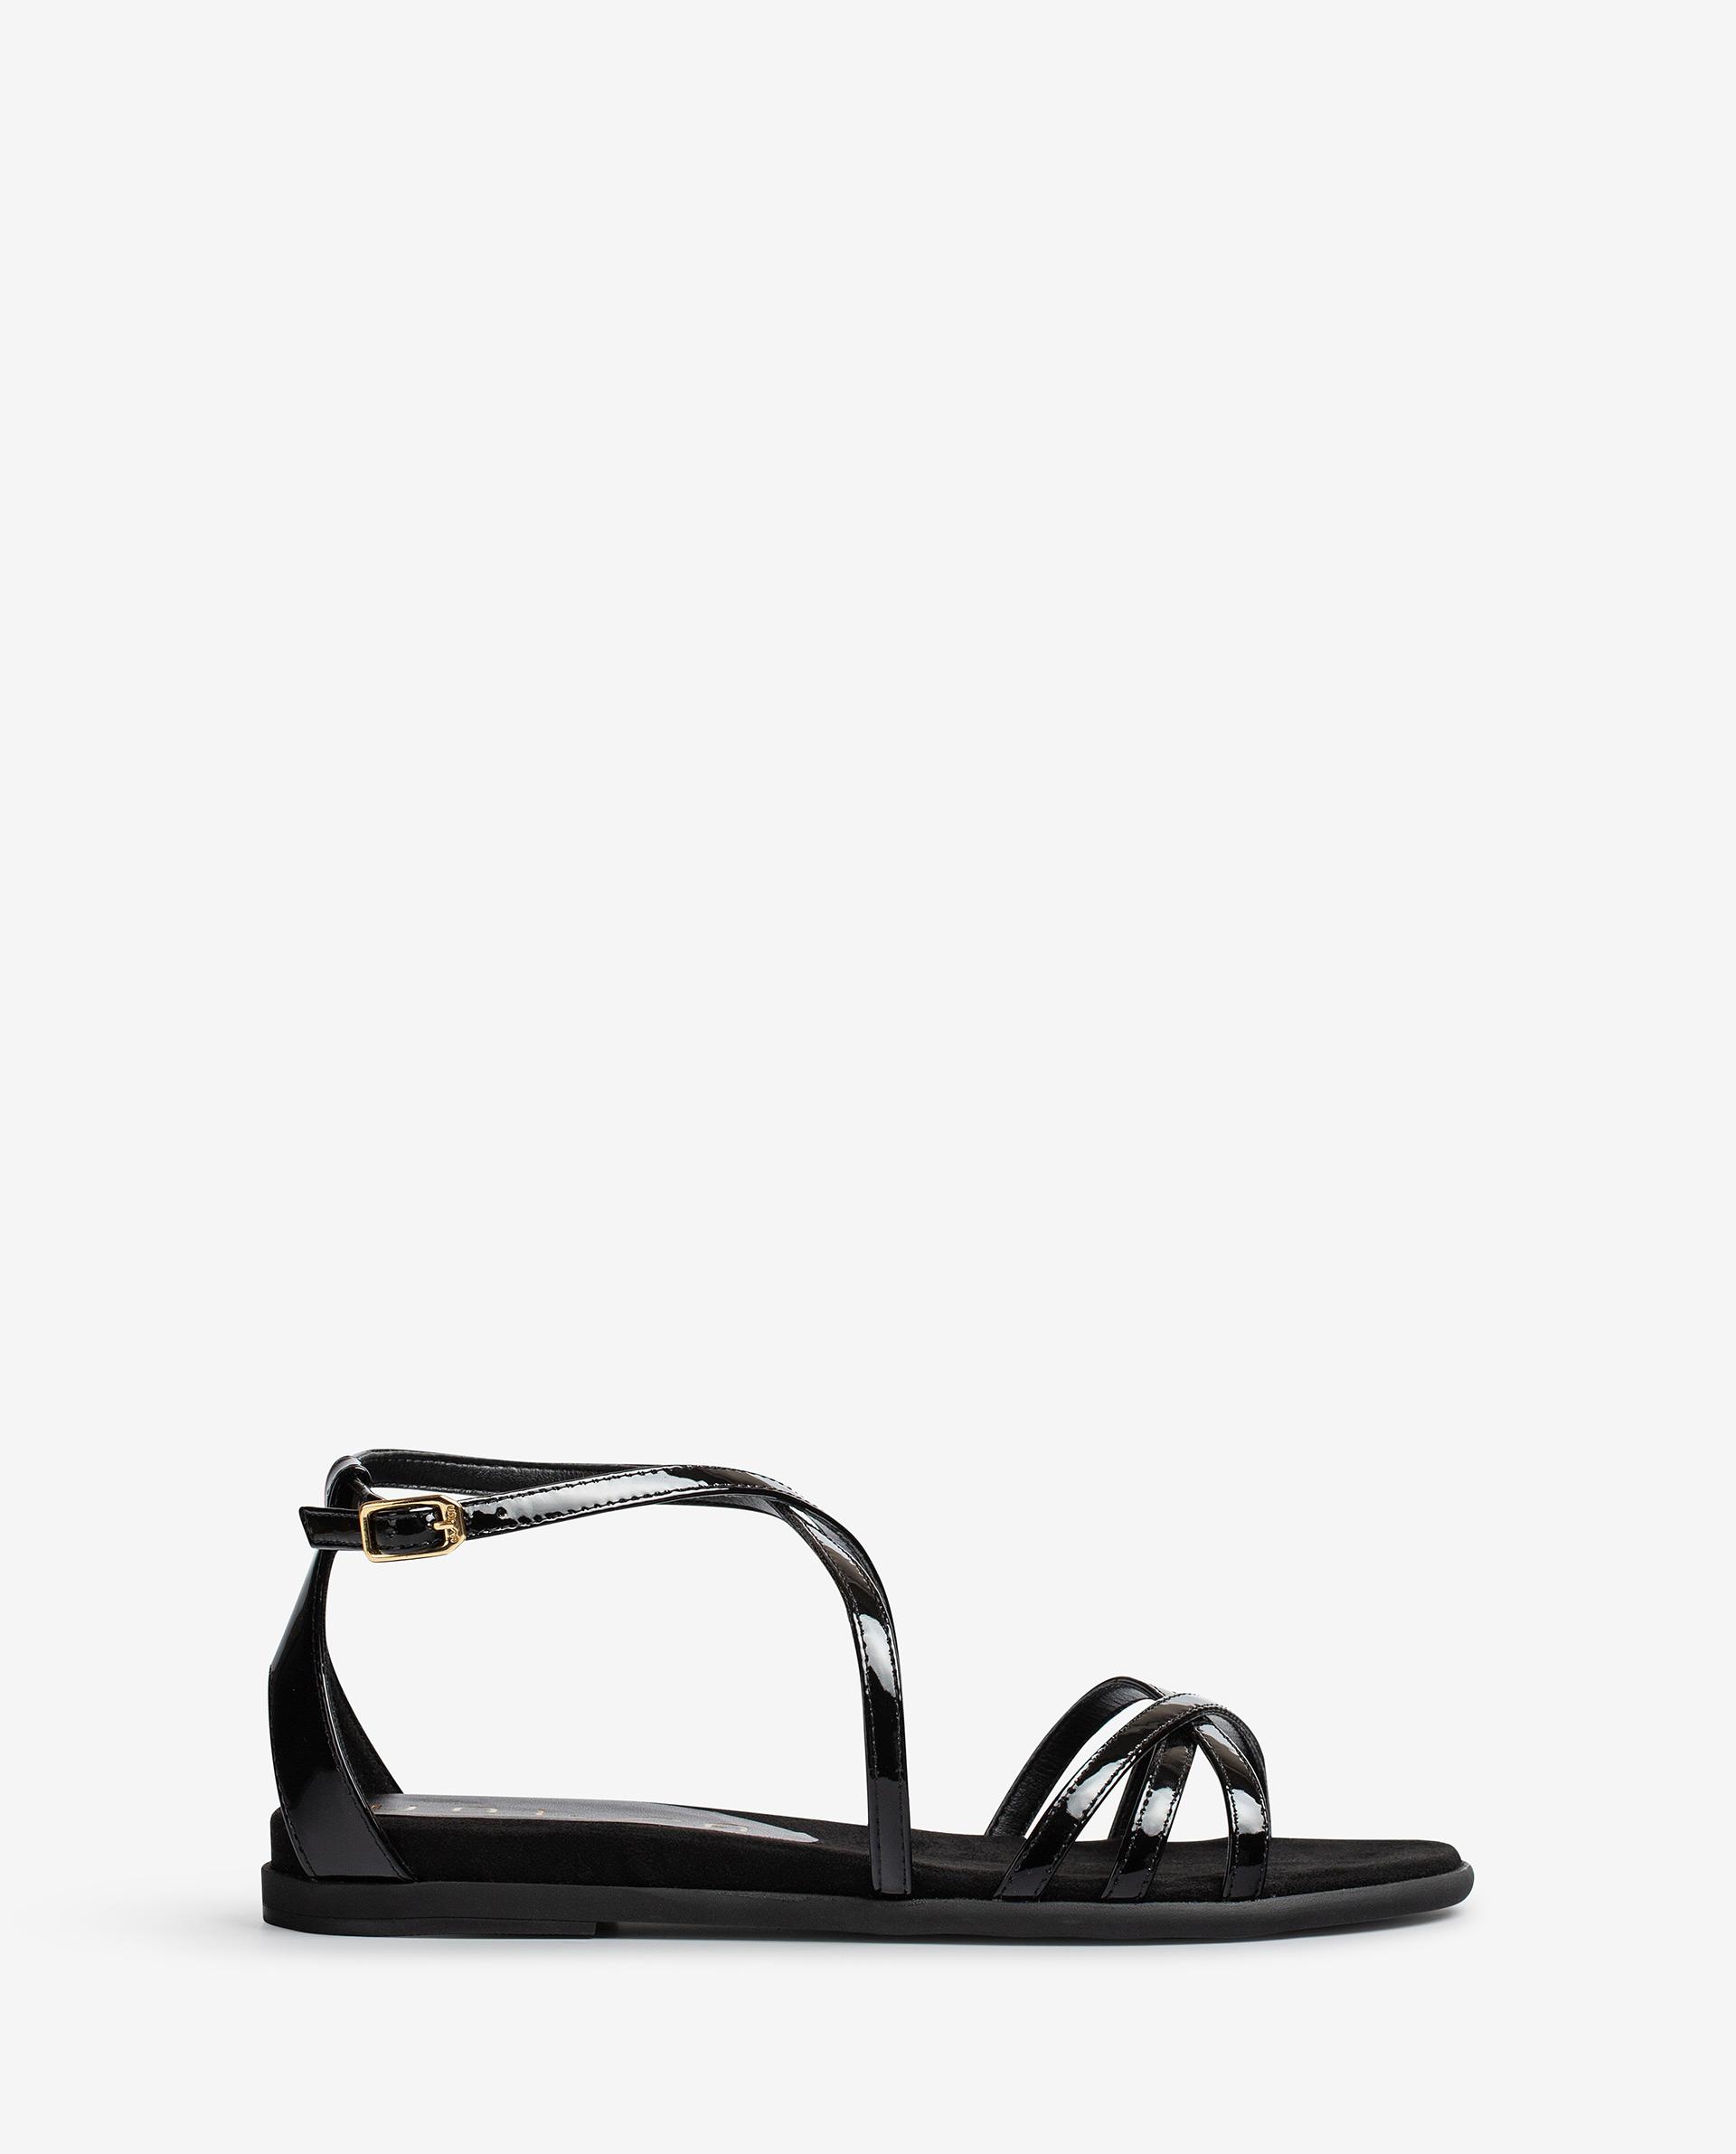 UNISA Patent leather flat sandals CARCER_PA 2